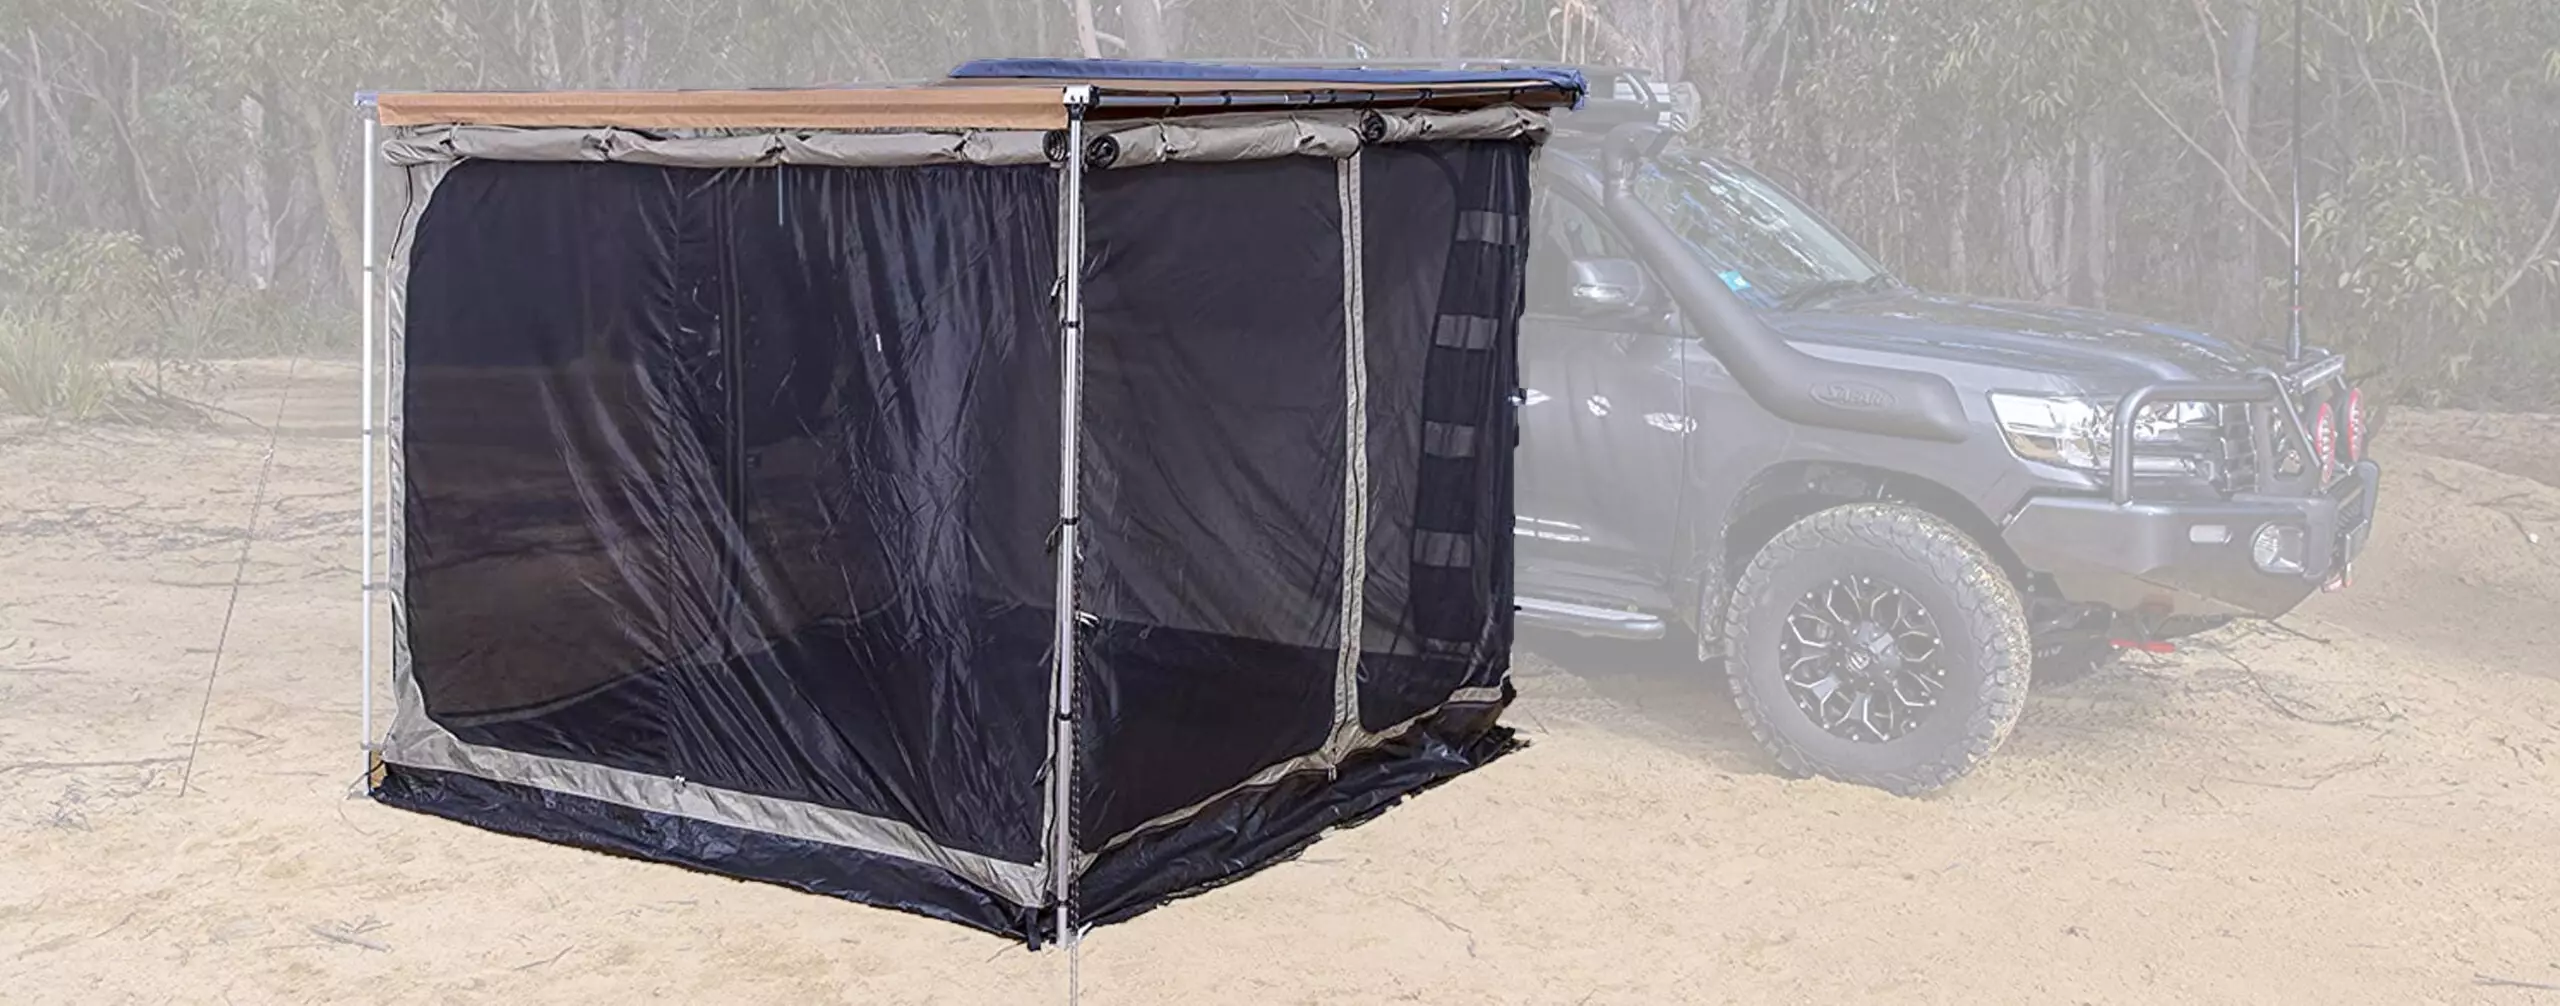 The Best Minivan Tents (Review and Buying Guide) in 2022